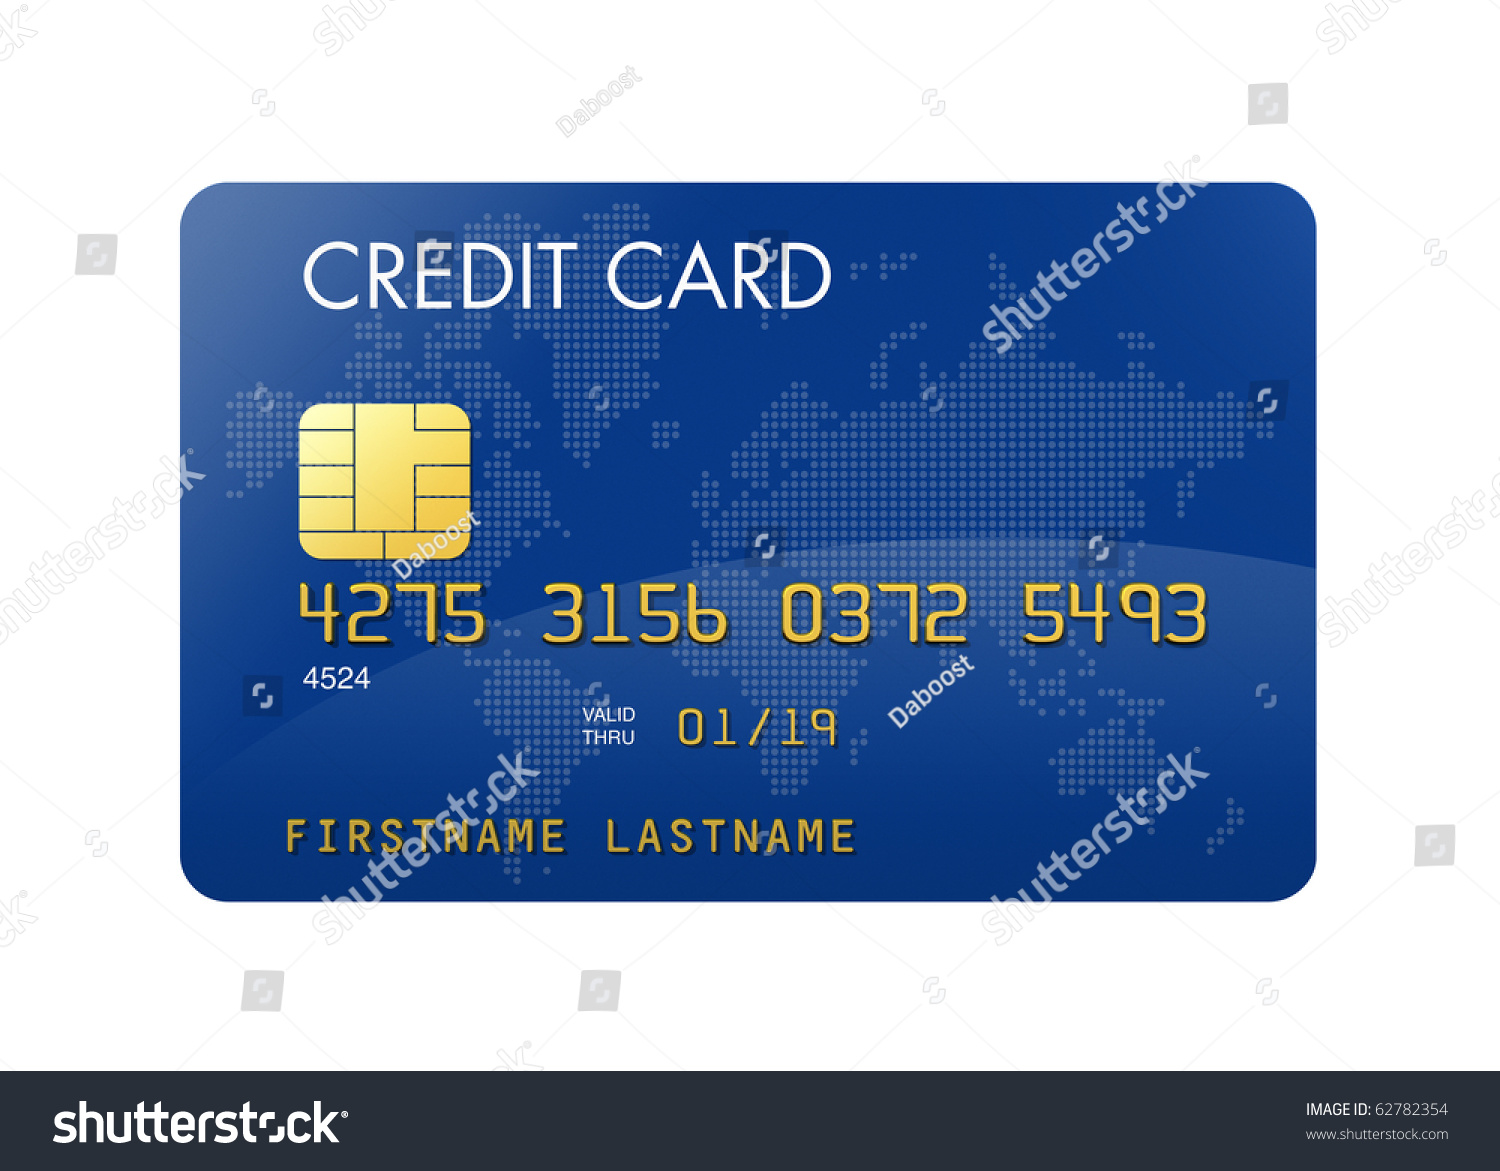 Blue Credit Card With World Map - Isolated On White With Clipping Path ...